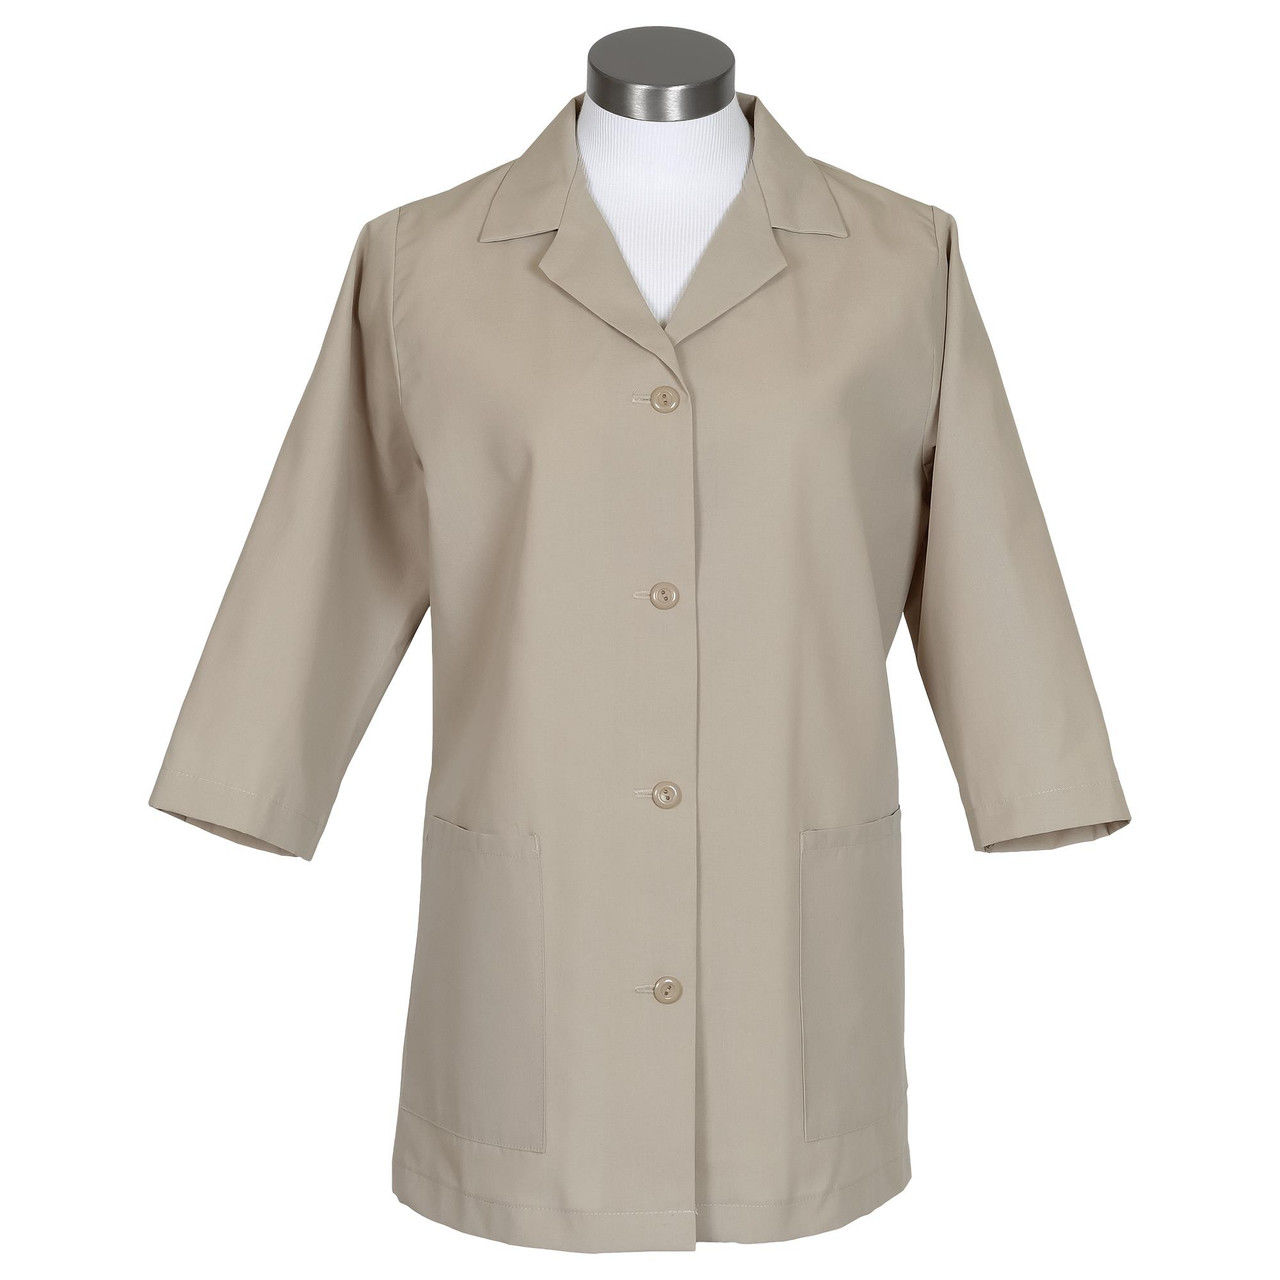 Can you confirm if the color of the tan smock in the product 'Female Smock, Tan, Fame 72' is indeed tan?